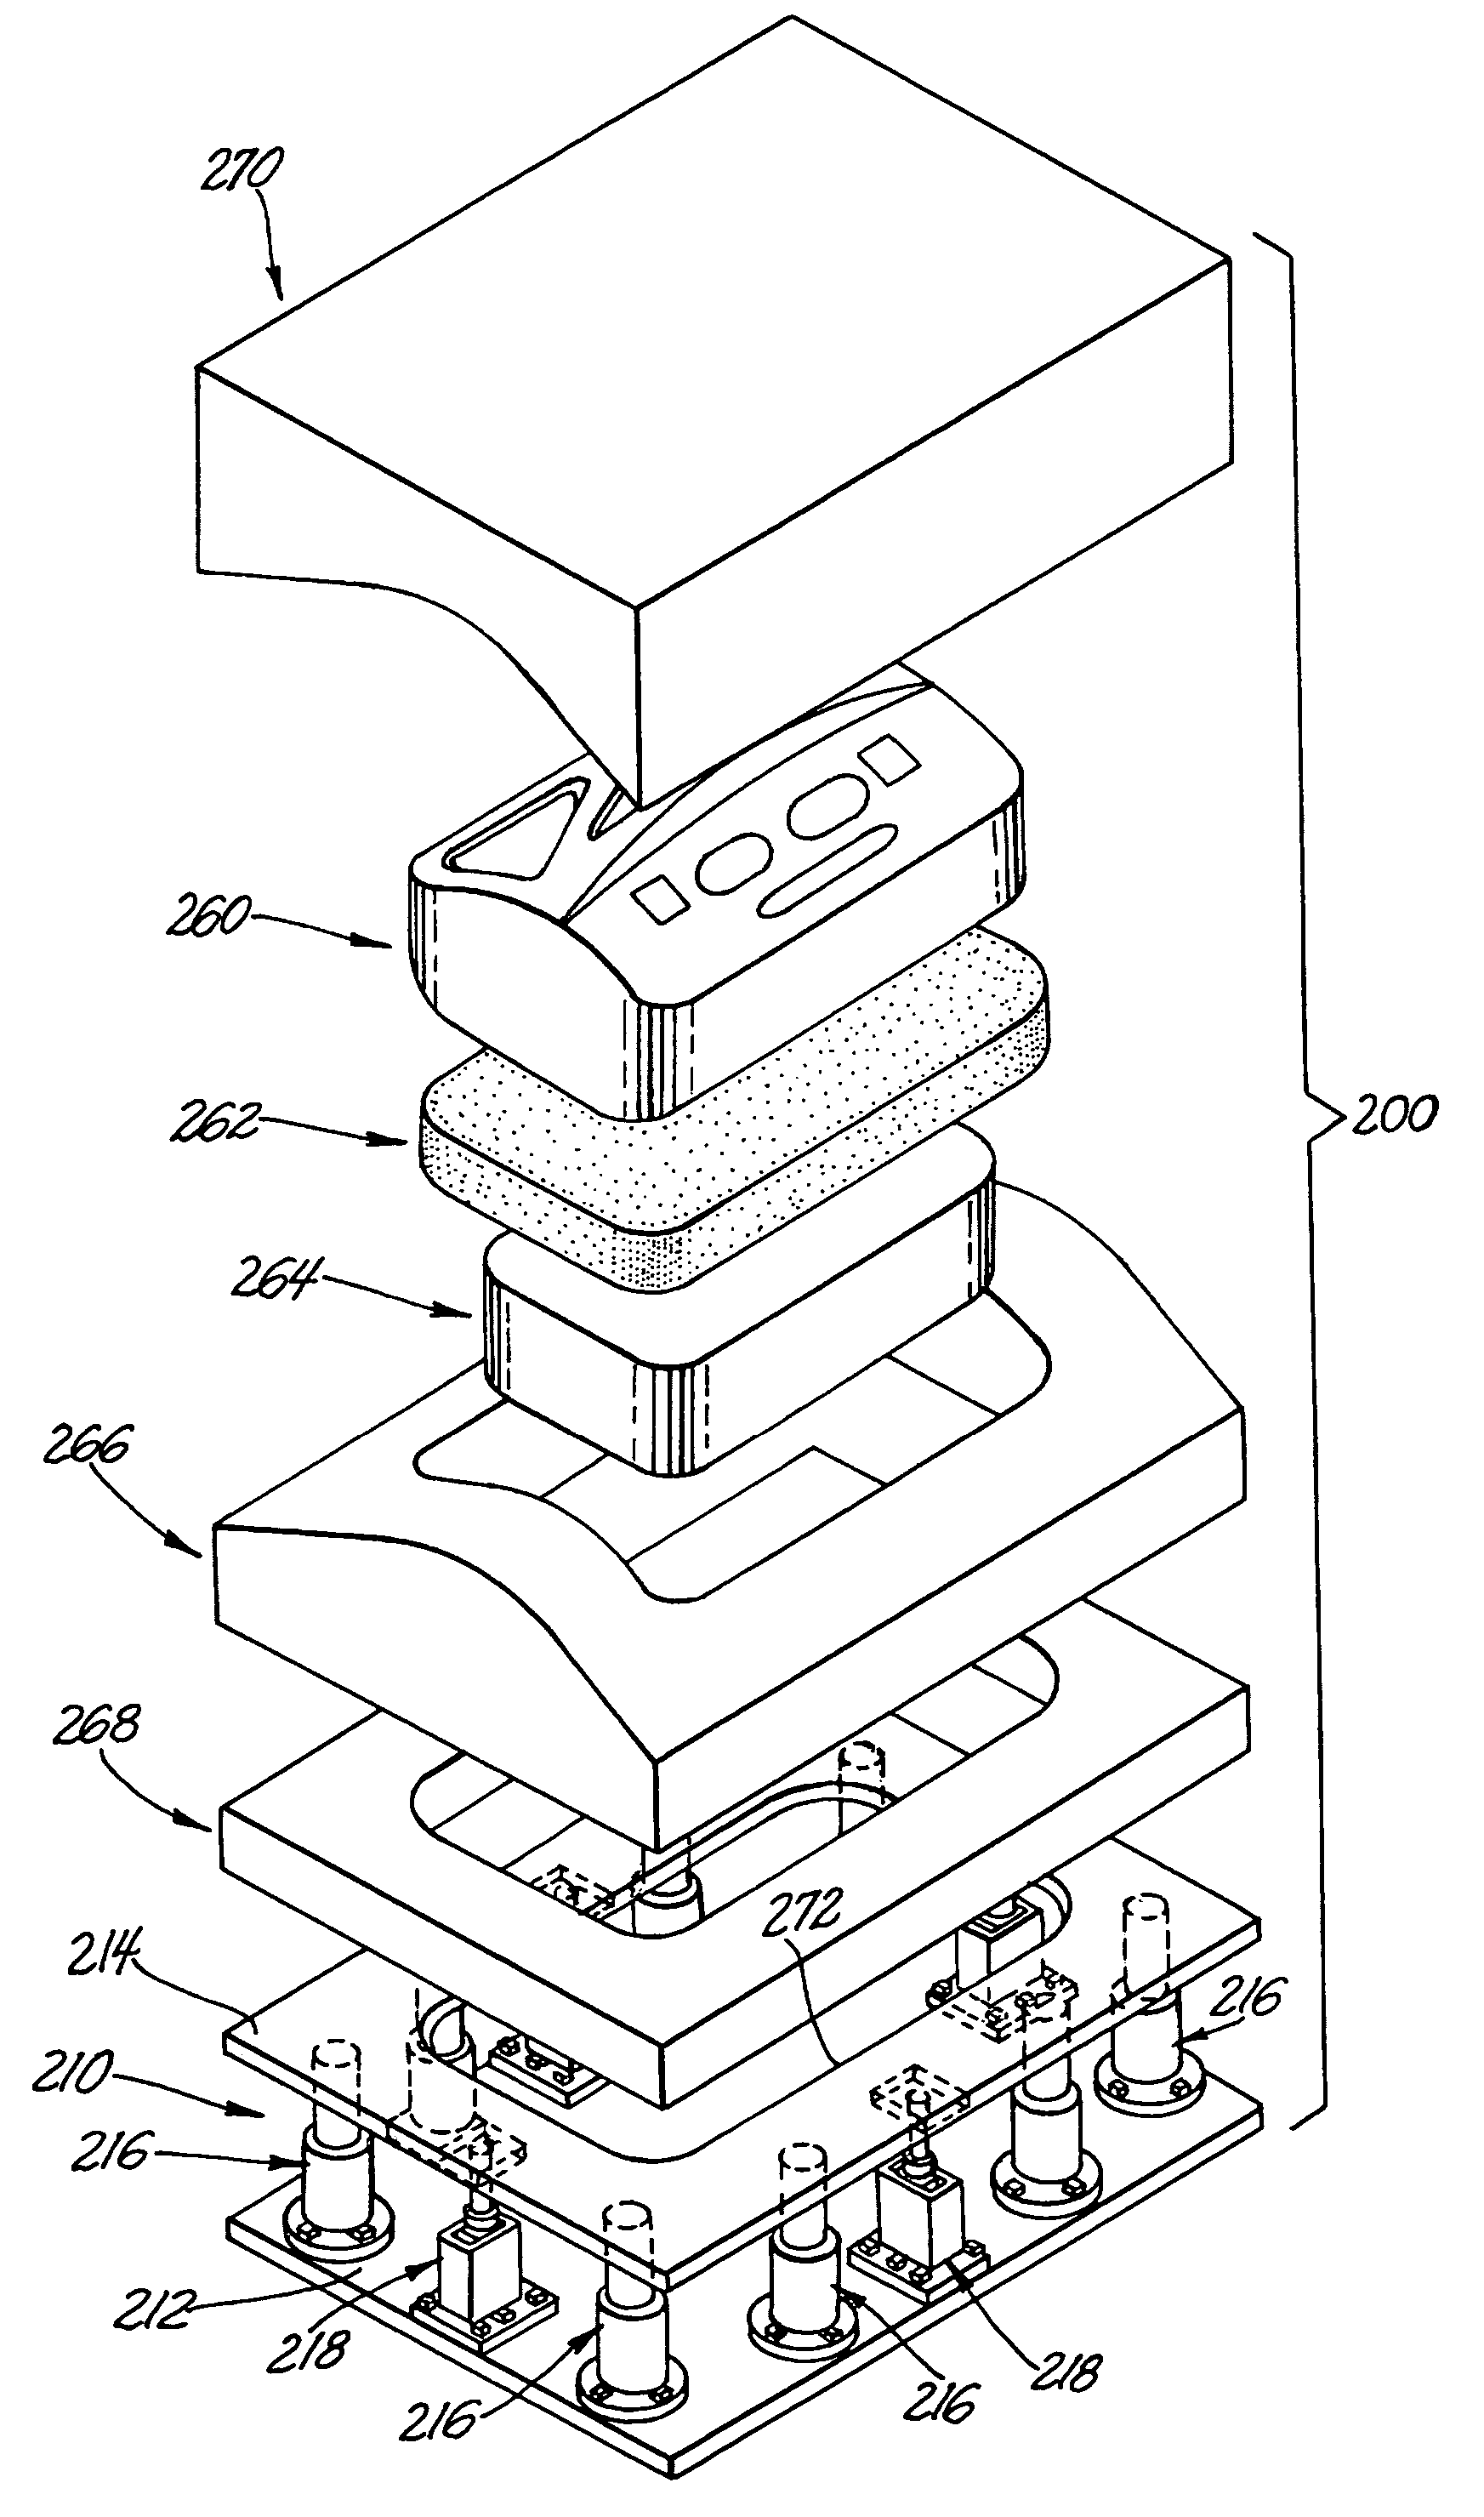 Die cushion apparatus for hot stretch-forming